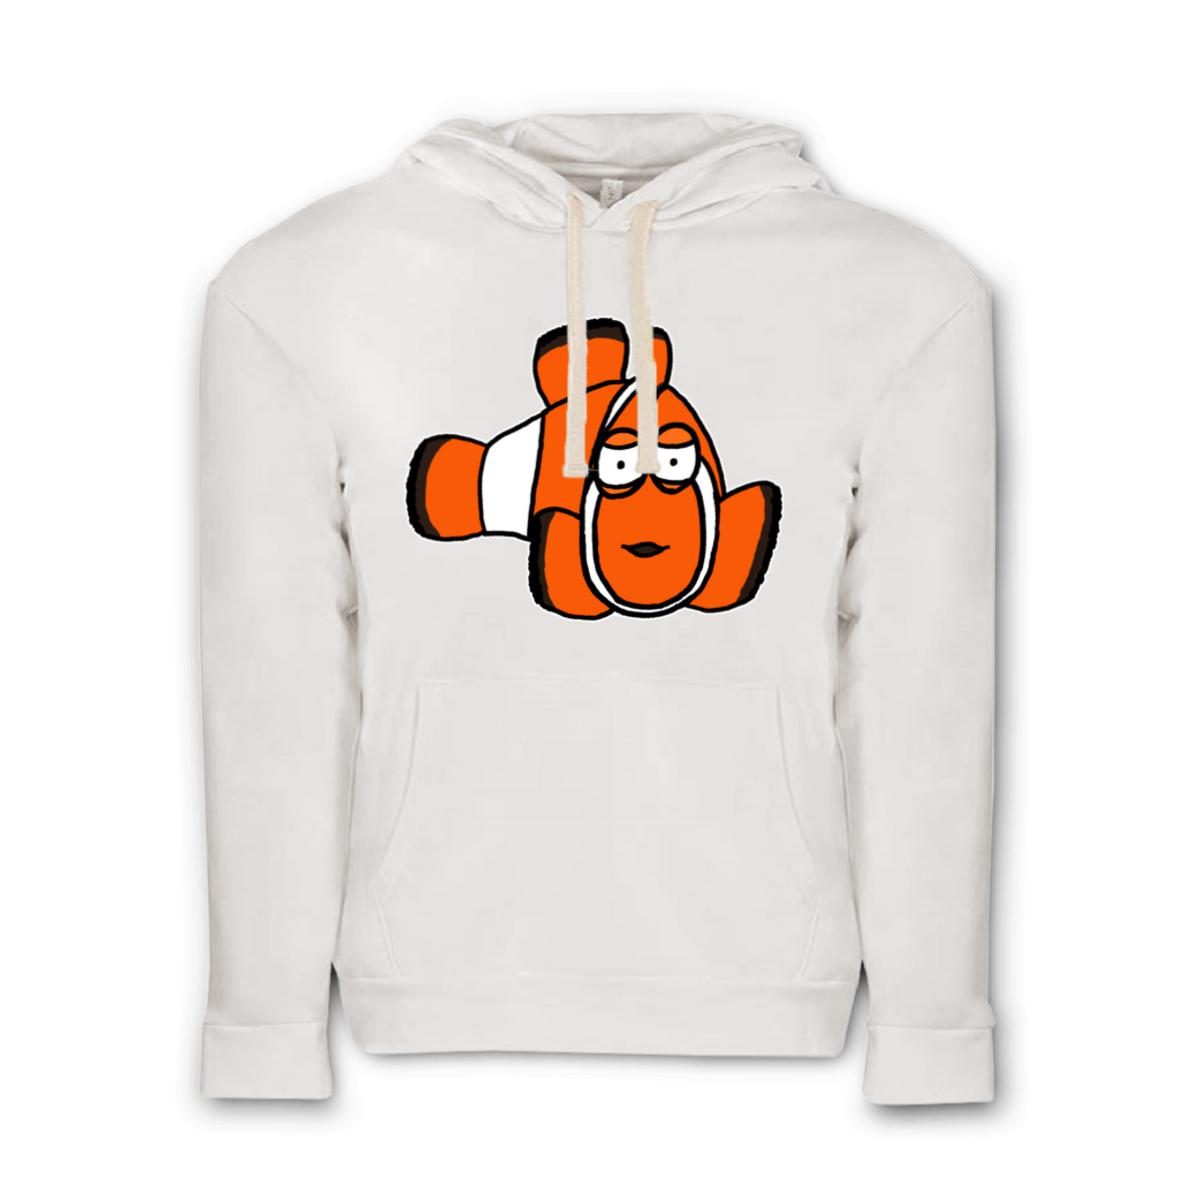 Clown Fish Unisex Pullover Hoodie Large white